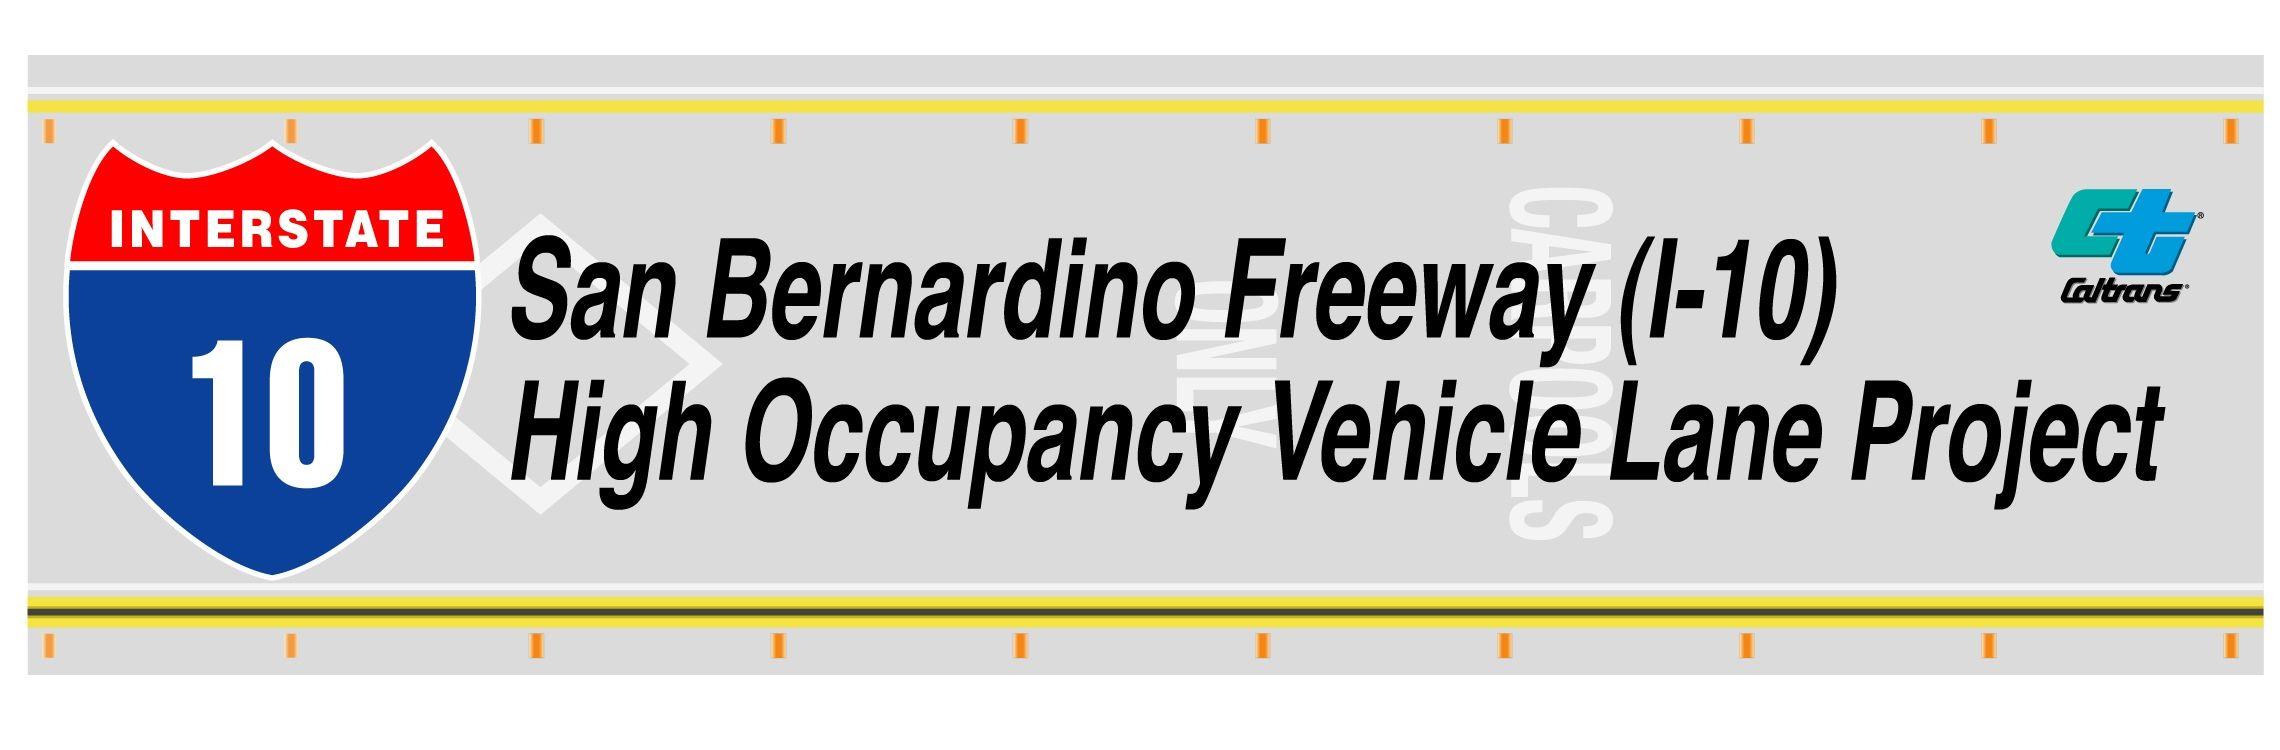 I-10 Logo - Caltrans District 7 - Category - Page